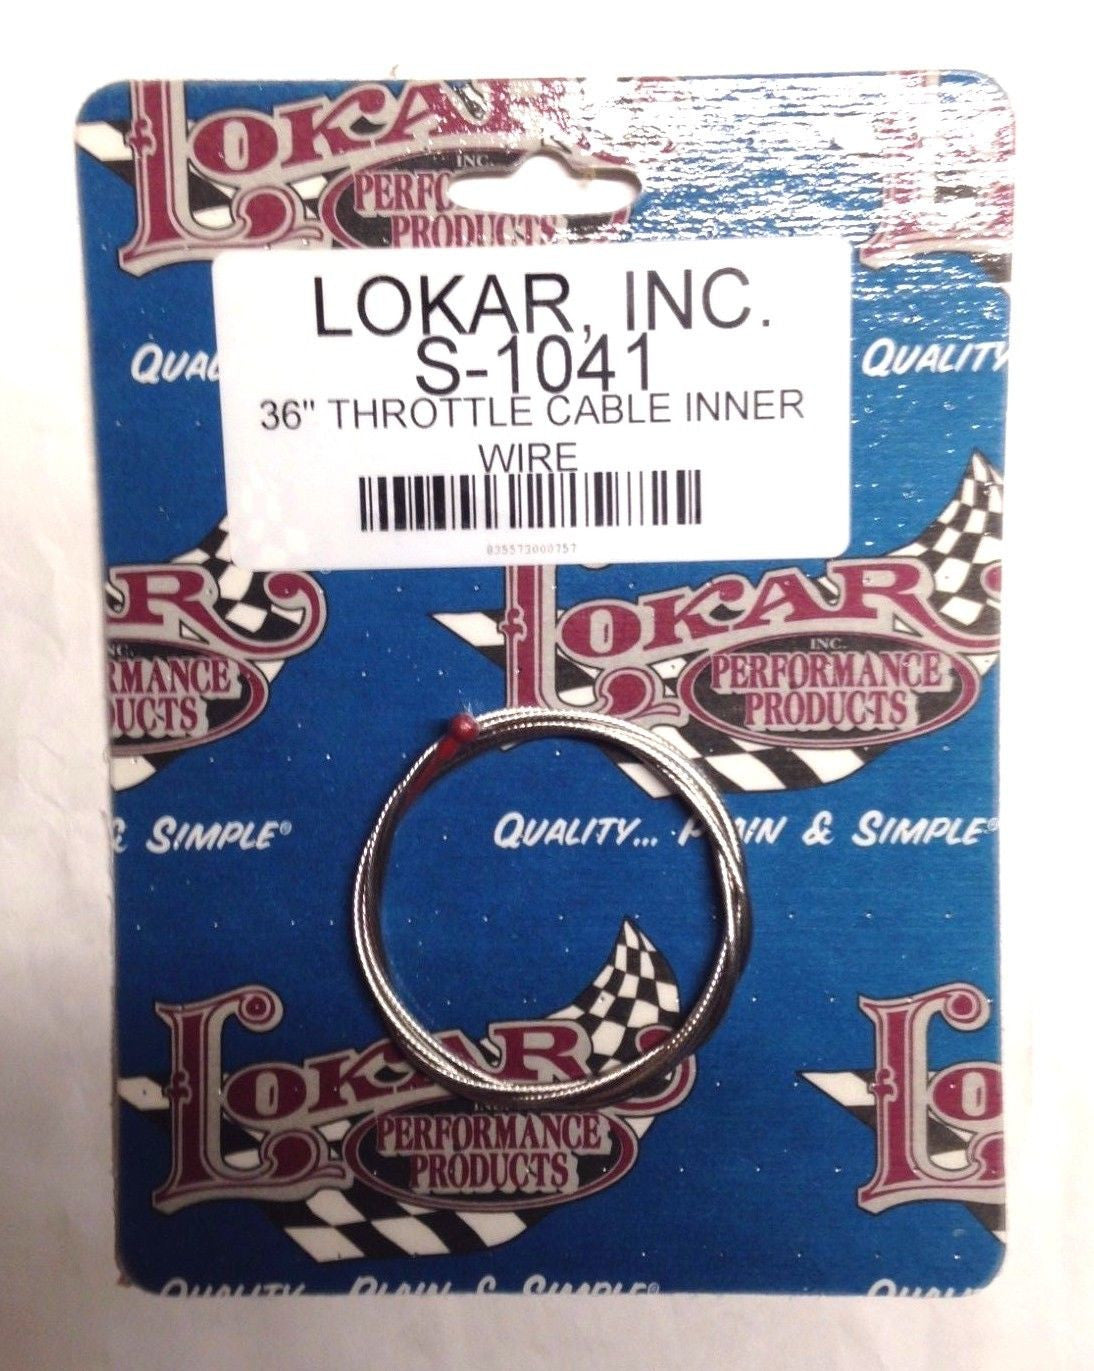 Lokar S-1041 36" Throttle Cable Inner Wire, Braided stainless wire